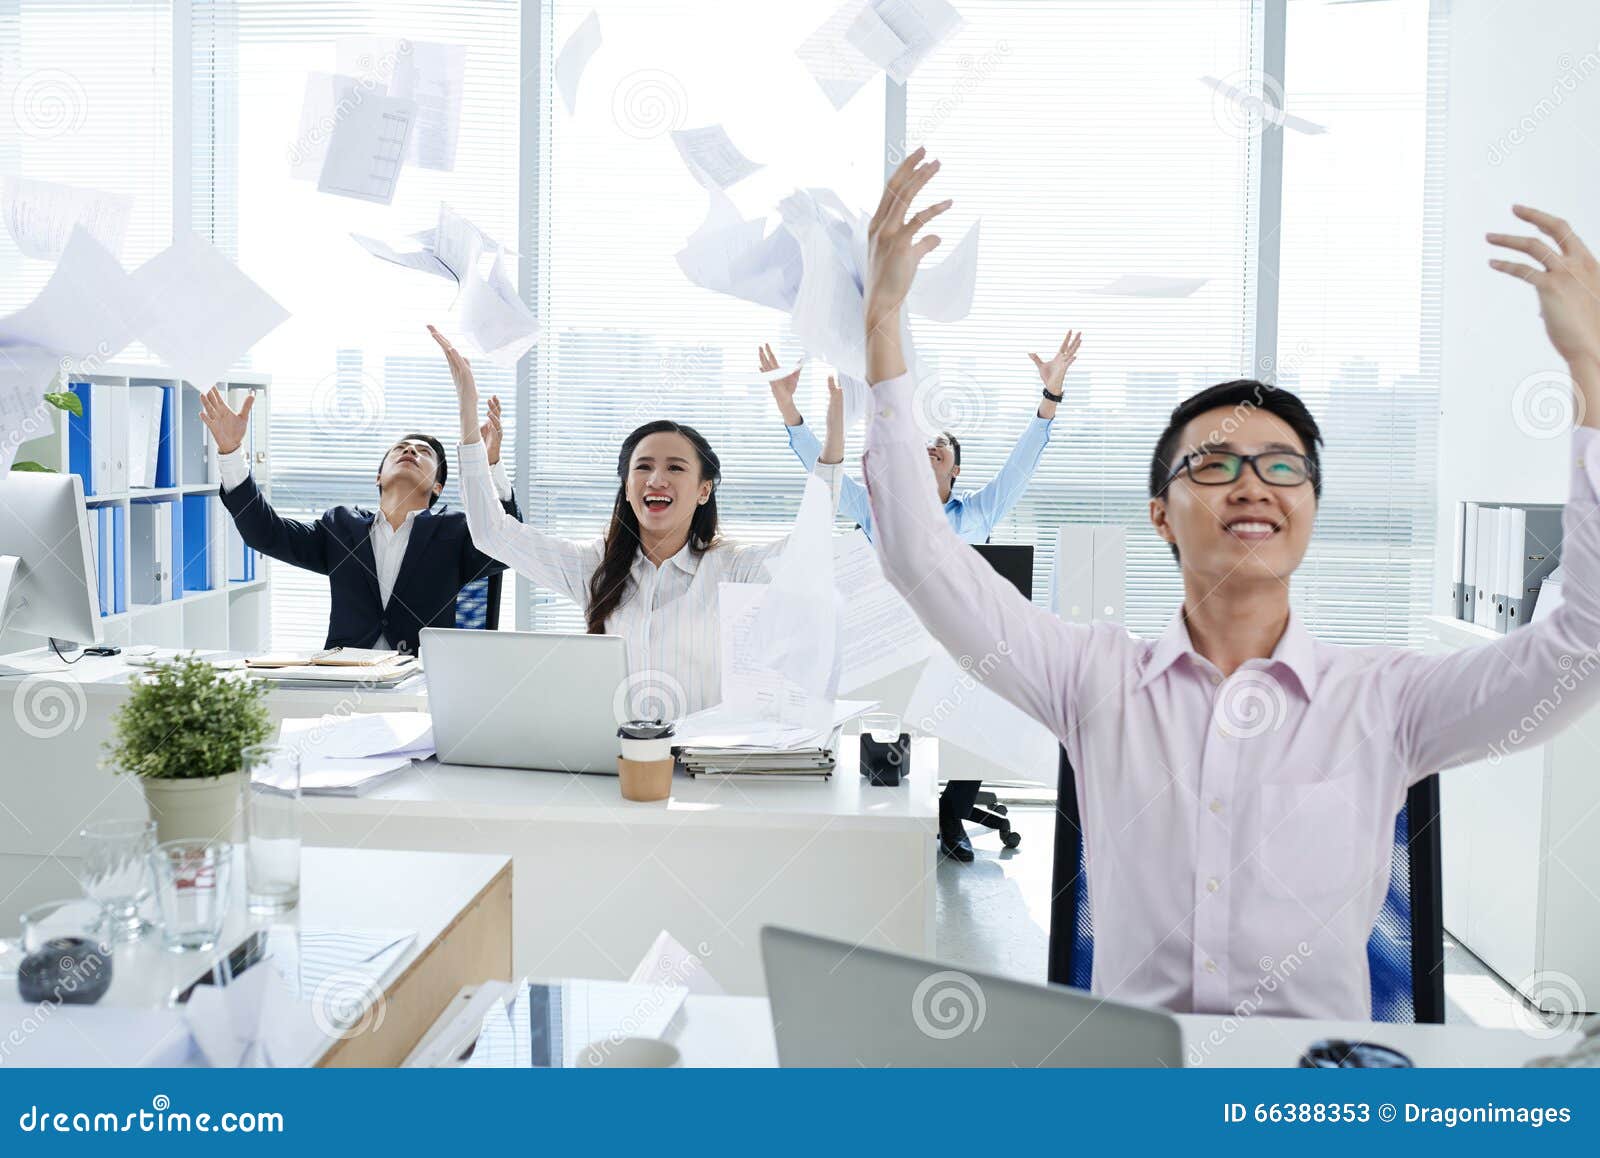 Happy office workers stock image. Image of vietnamese - 66388353